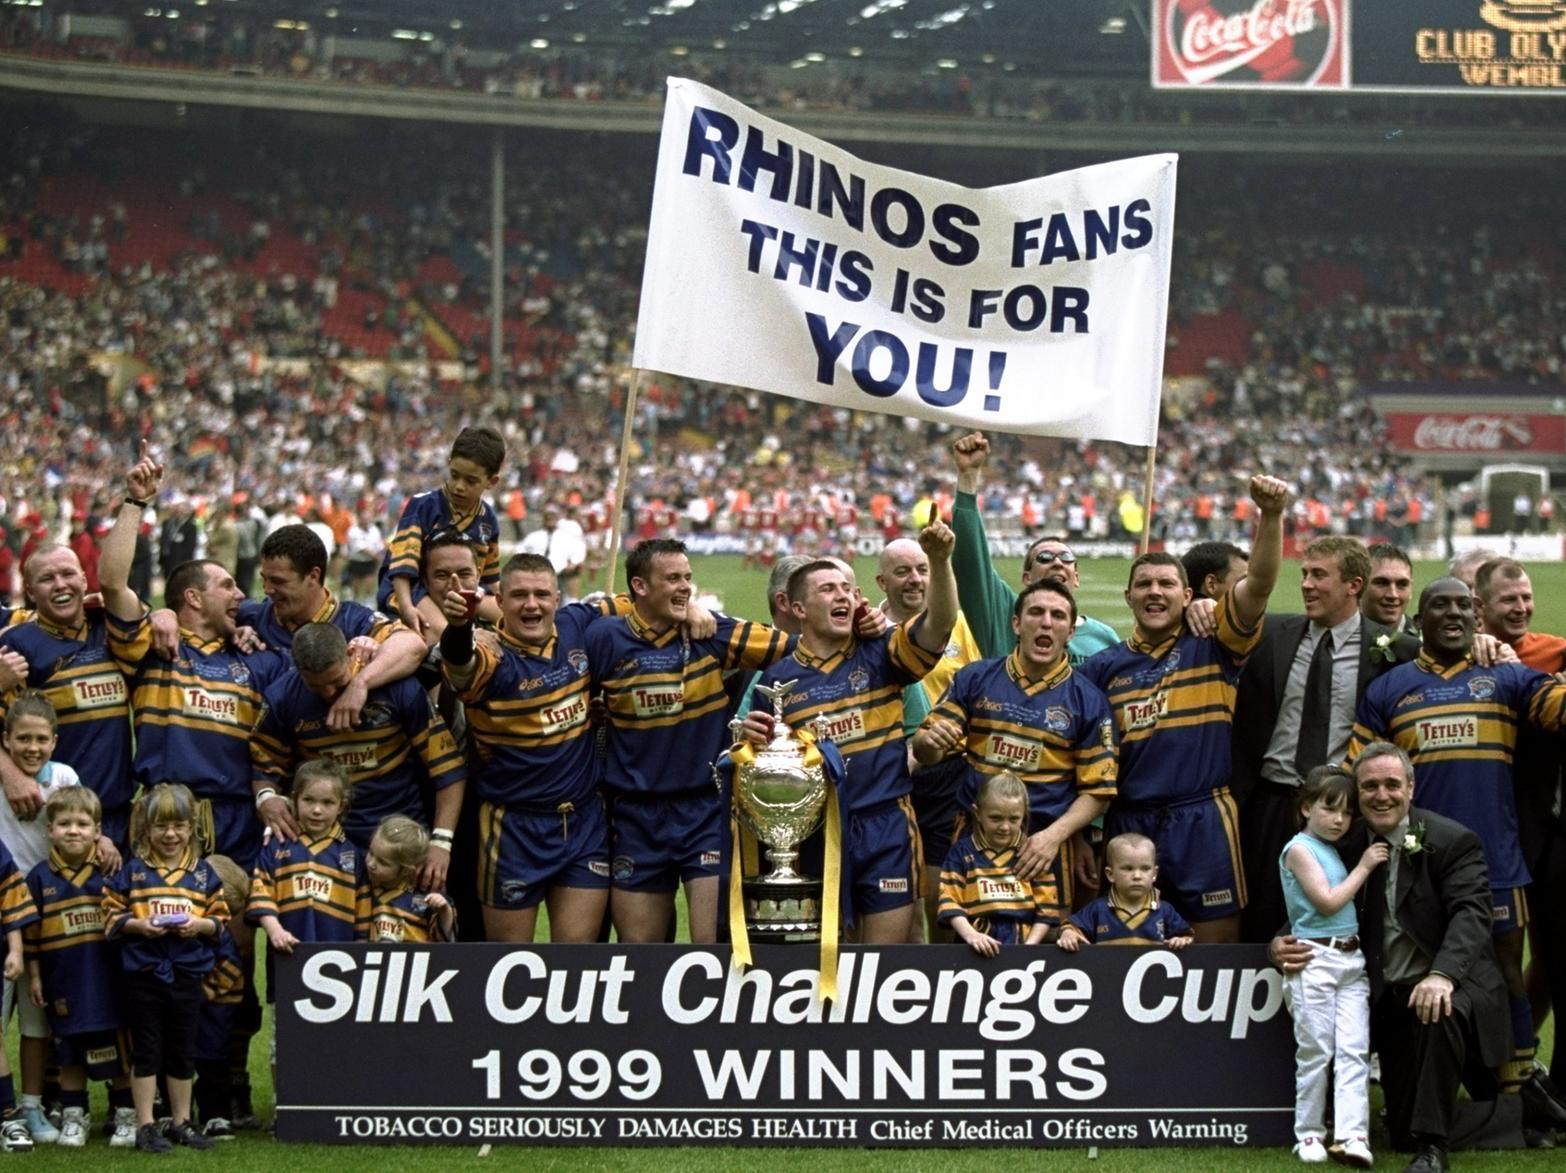 Leeds Rhinos lifted the Rugby League Challenge Cup in May 1999 after defeating London Broncos 52-16 at Wembley.